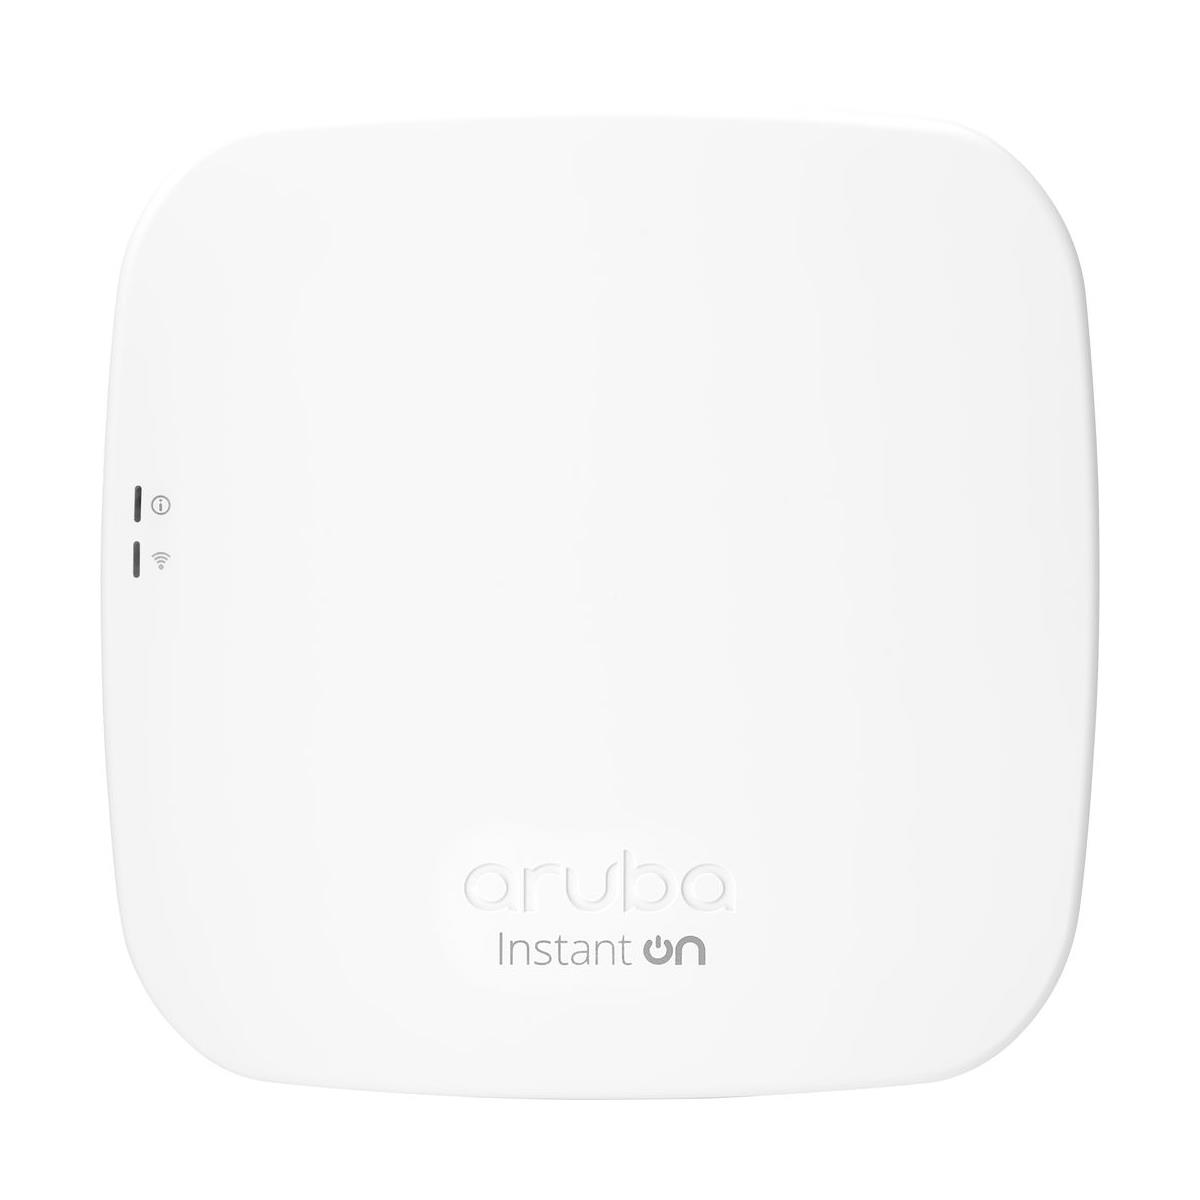 Image of Aruba Instant On AP12 Indoor Access Point with DC Power Adapter and Cord Bundle